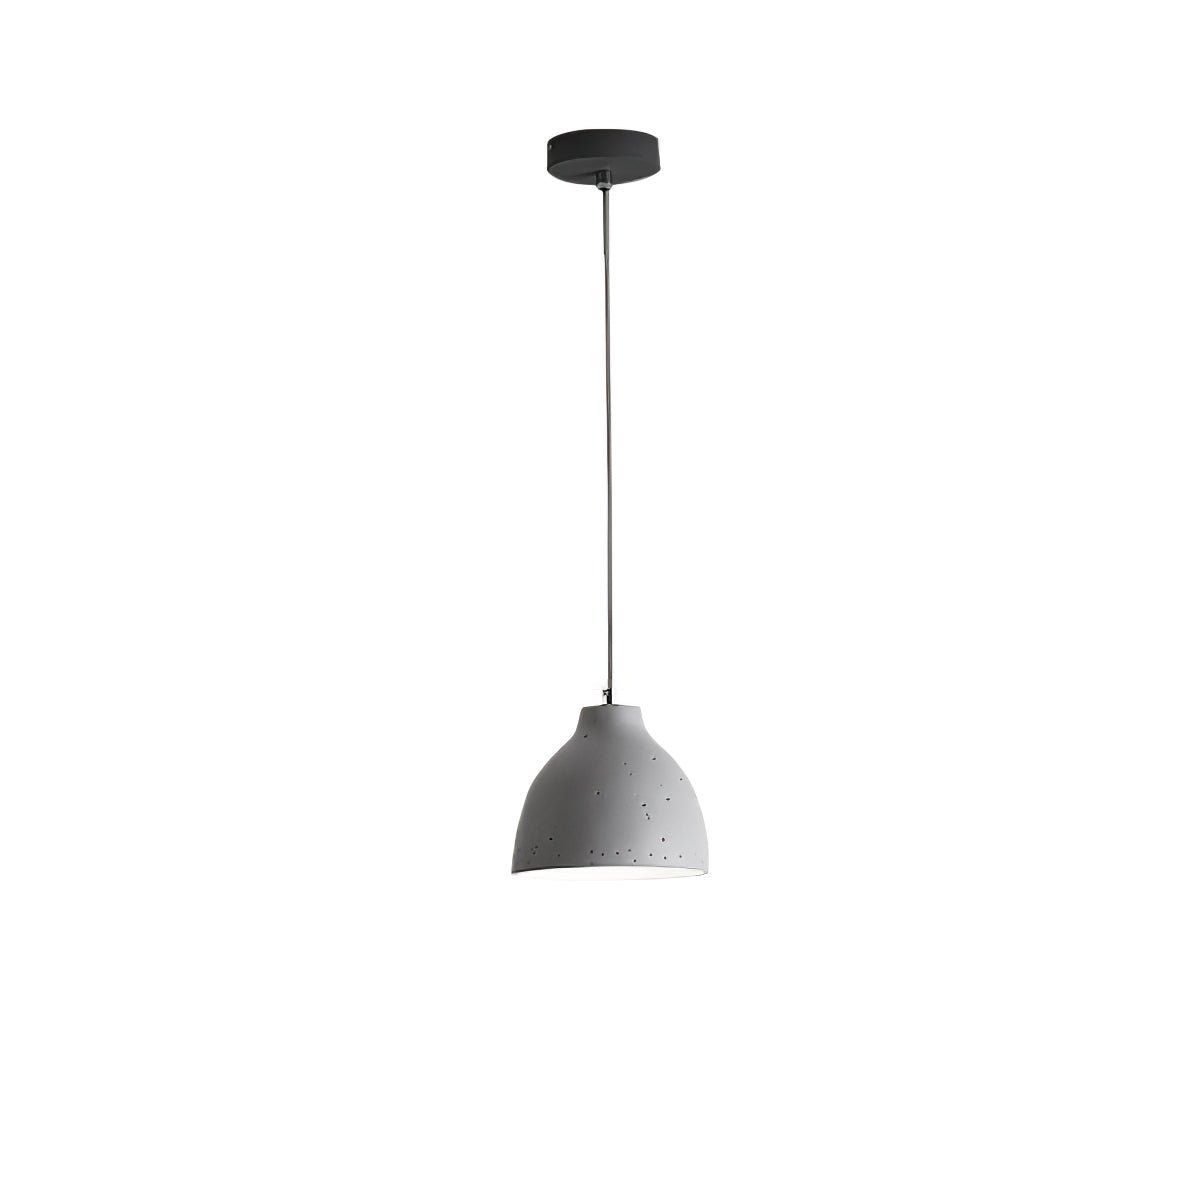 Resin Bowl Pendant Lamp in Grey, with a diameter of 6.7 inches and a height of 59 inches (17 cm x 150 cm).